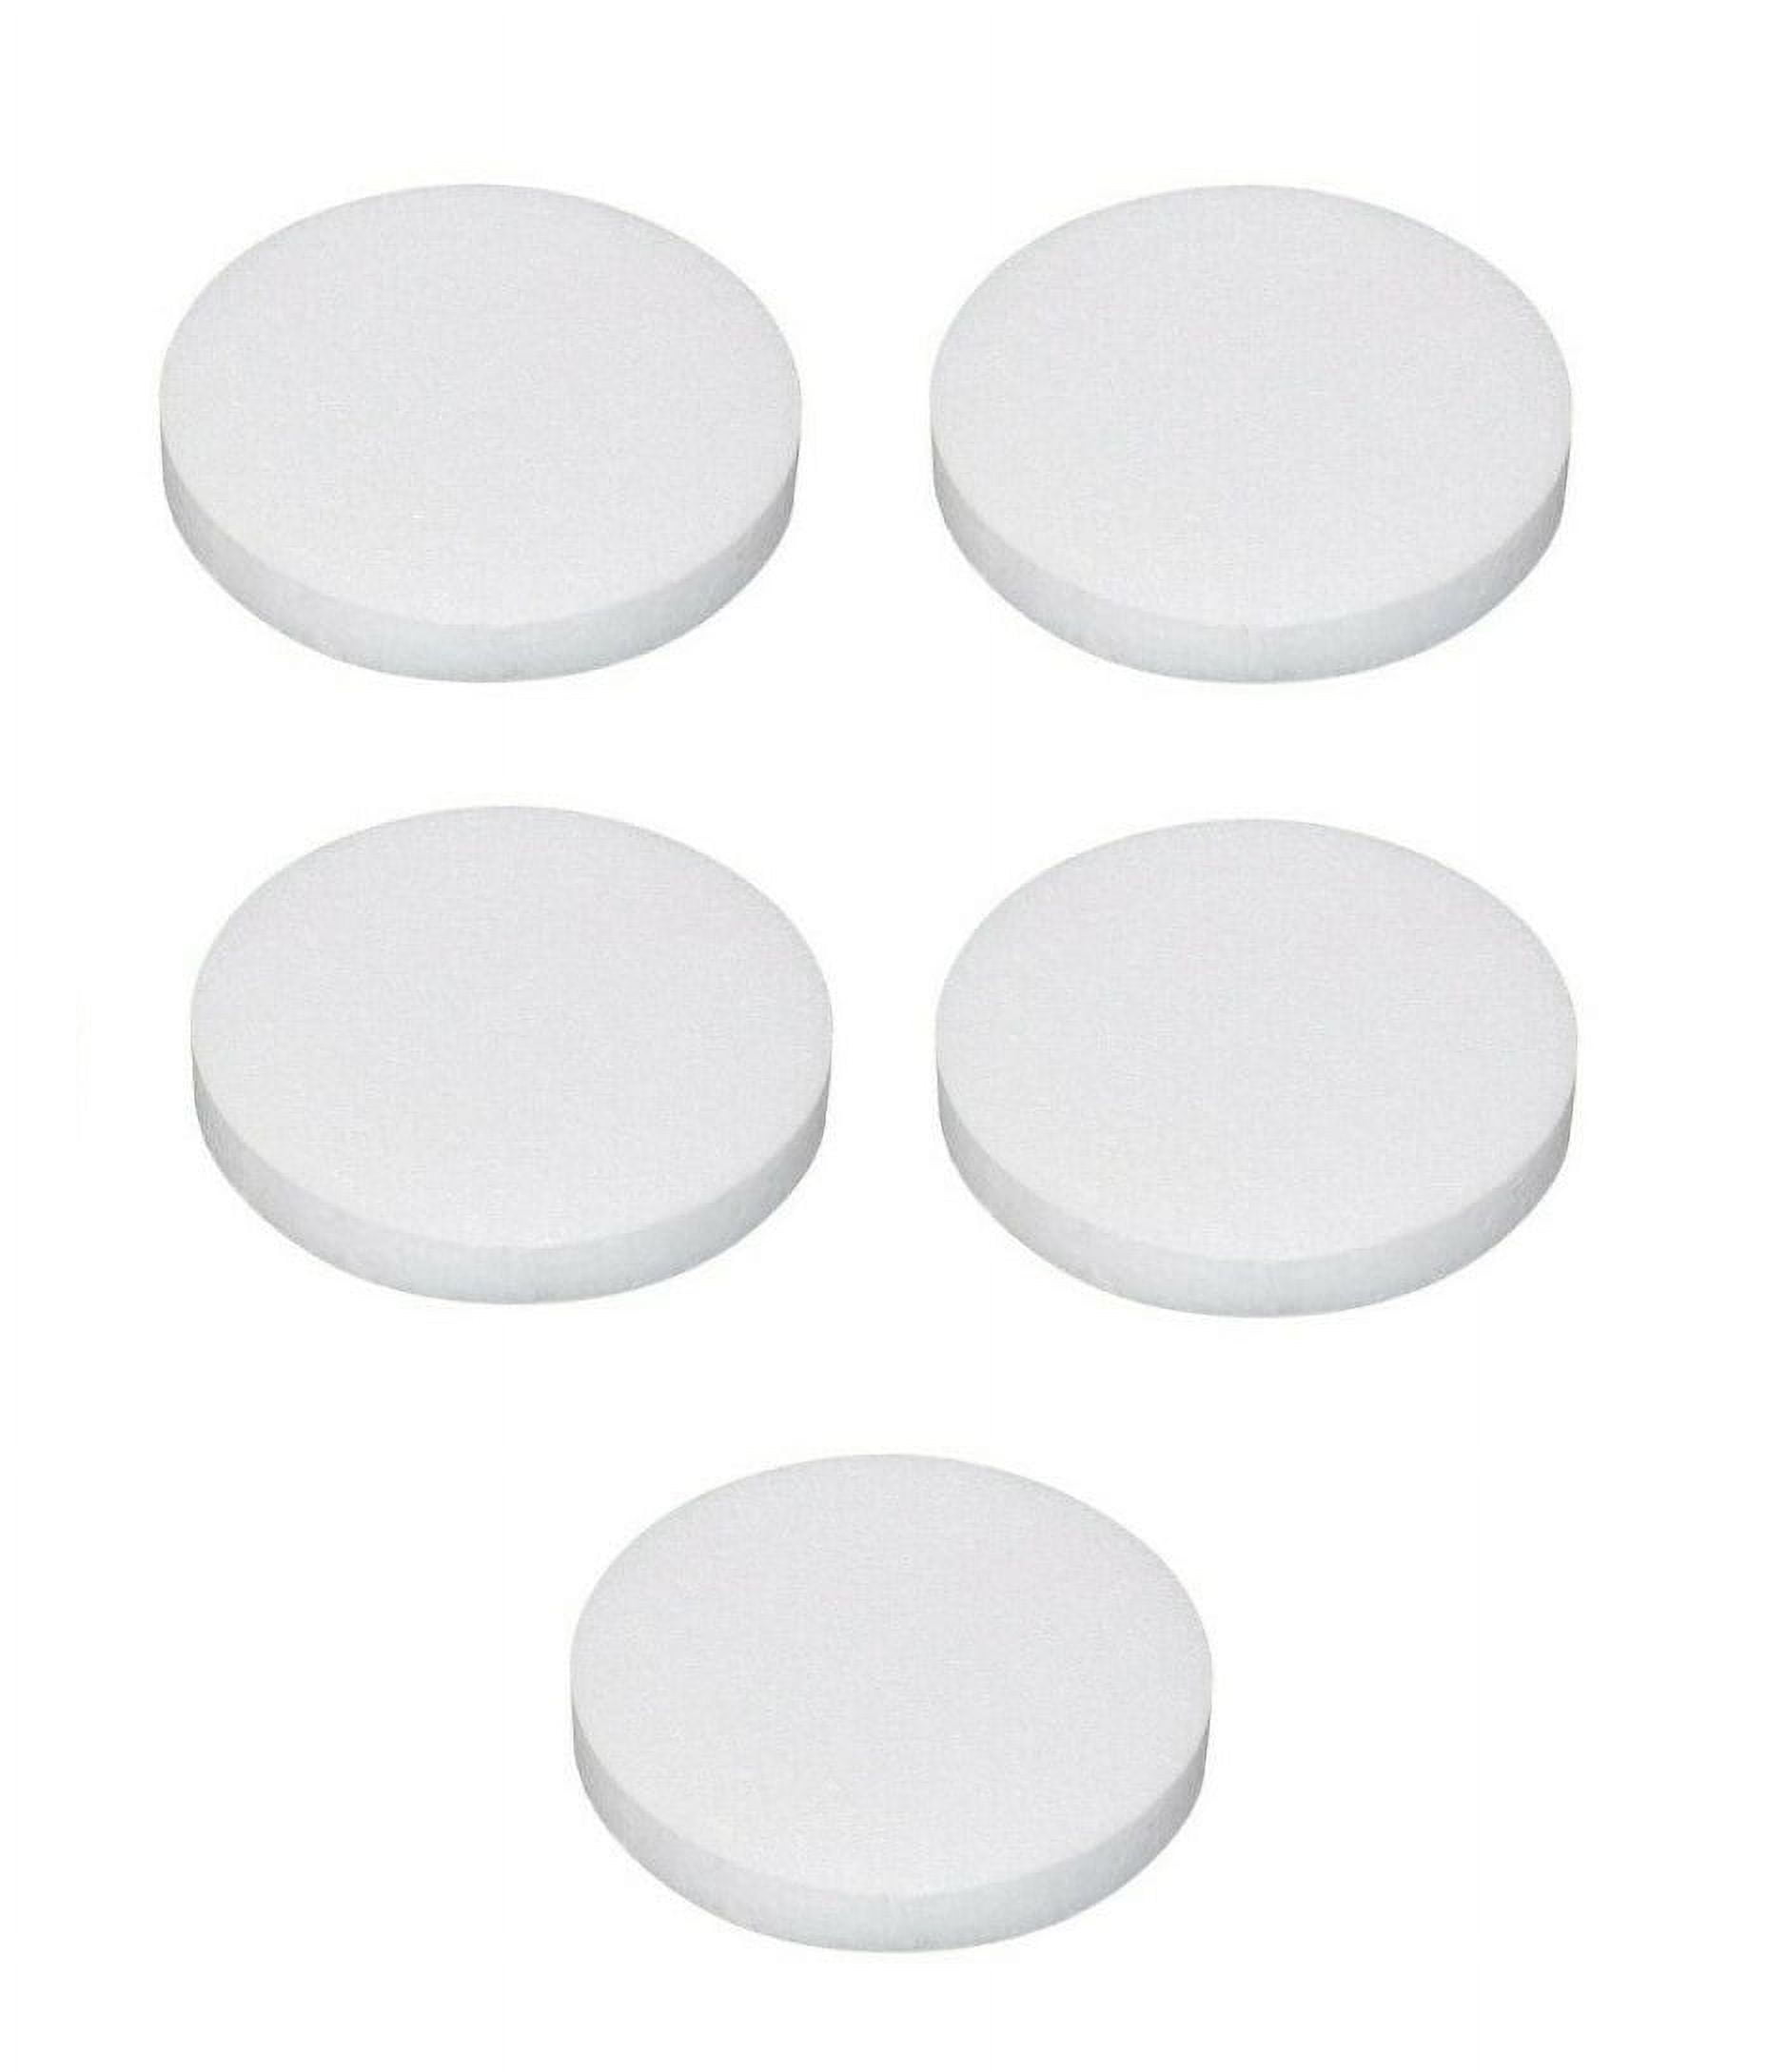 Bright Creations Craft Foam Disk, Blank Circles for DIY and Art (6 x 6